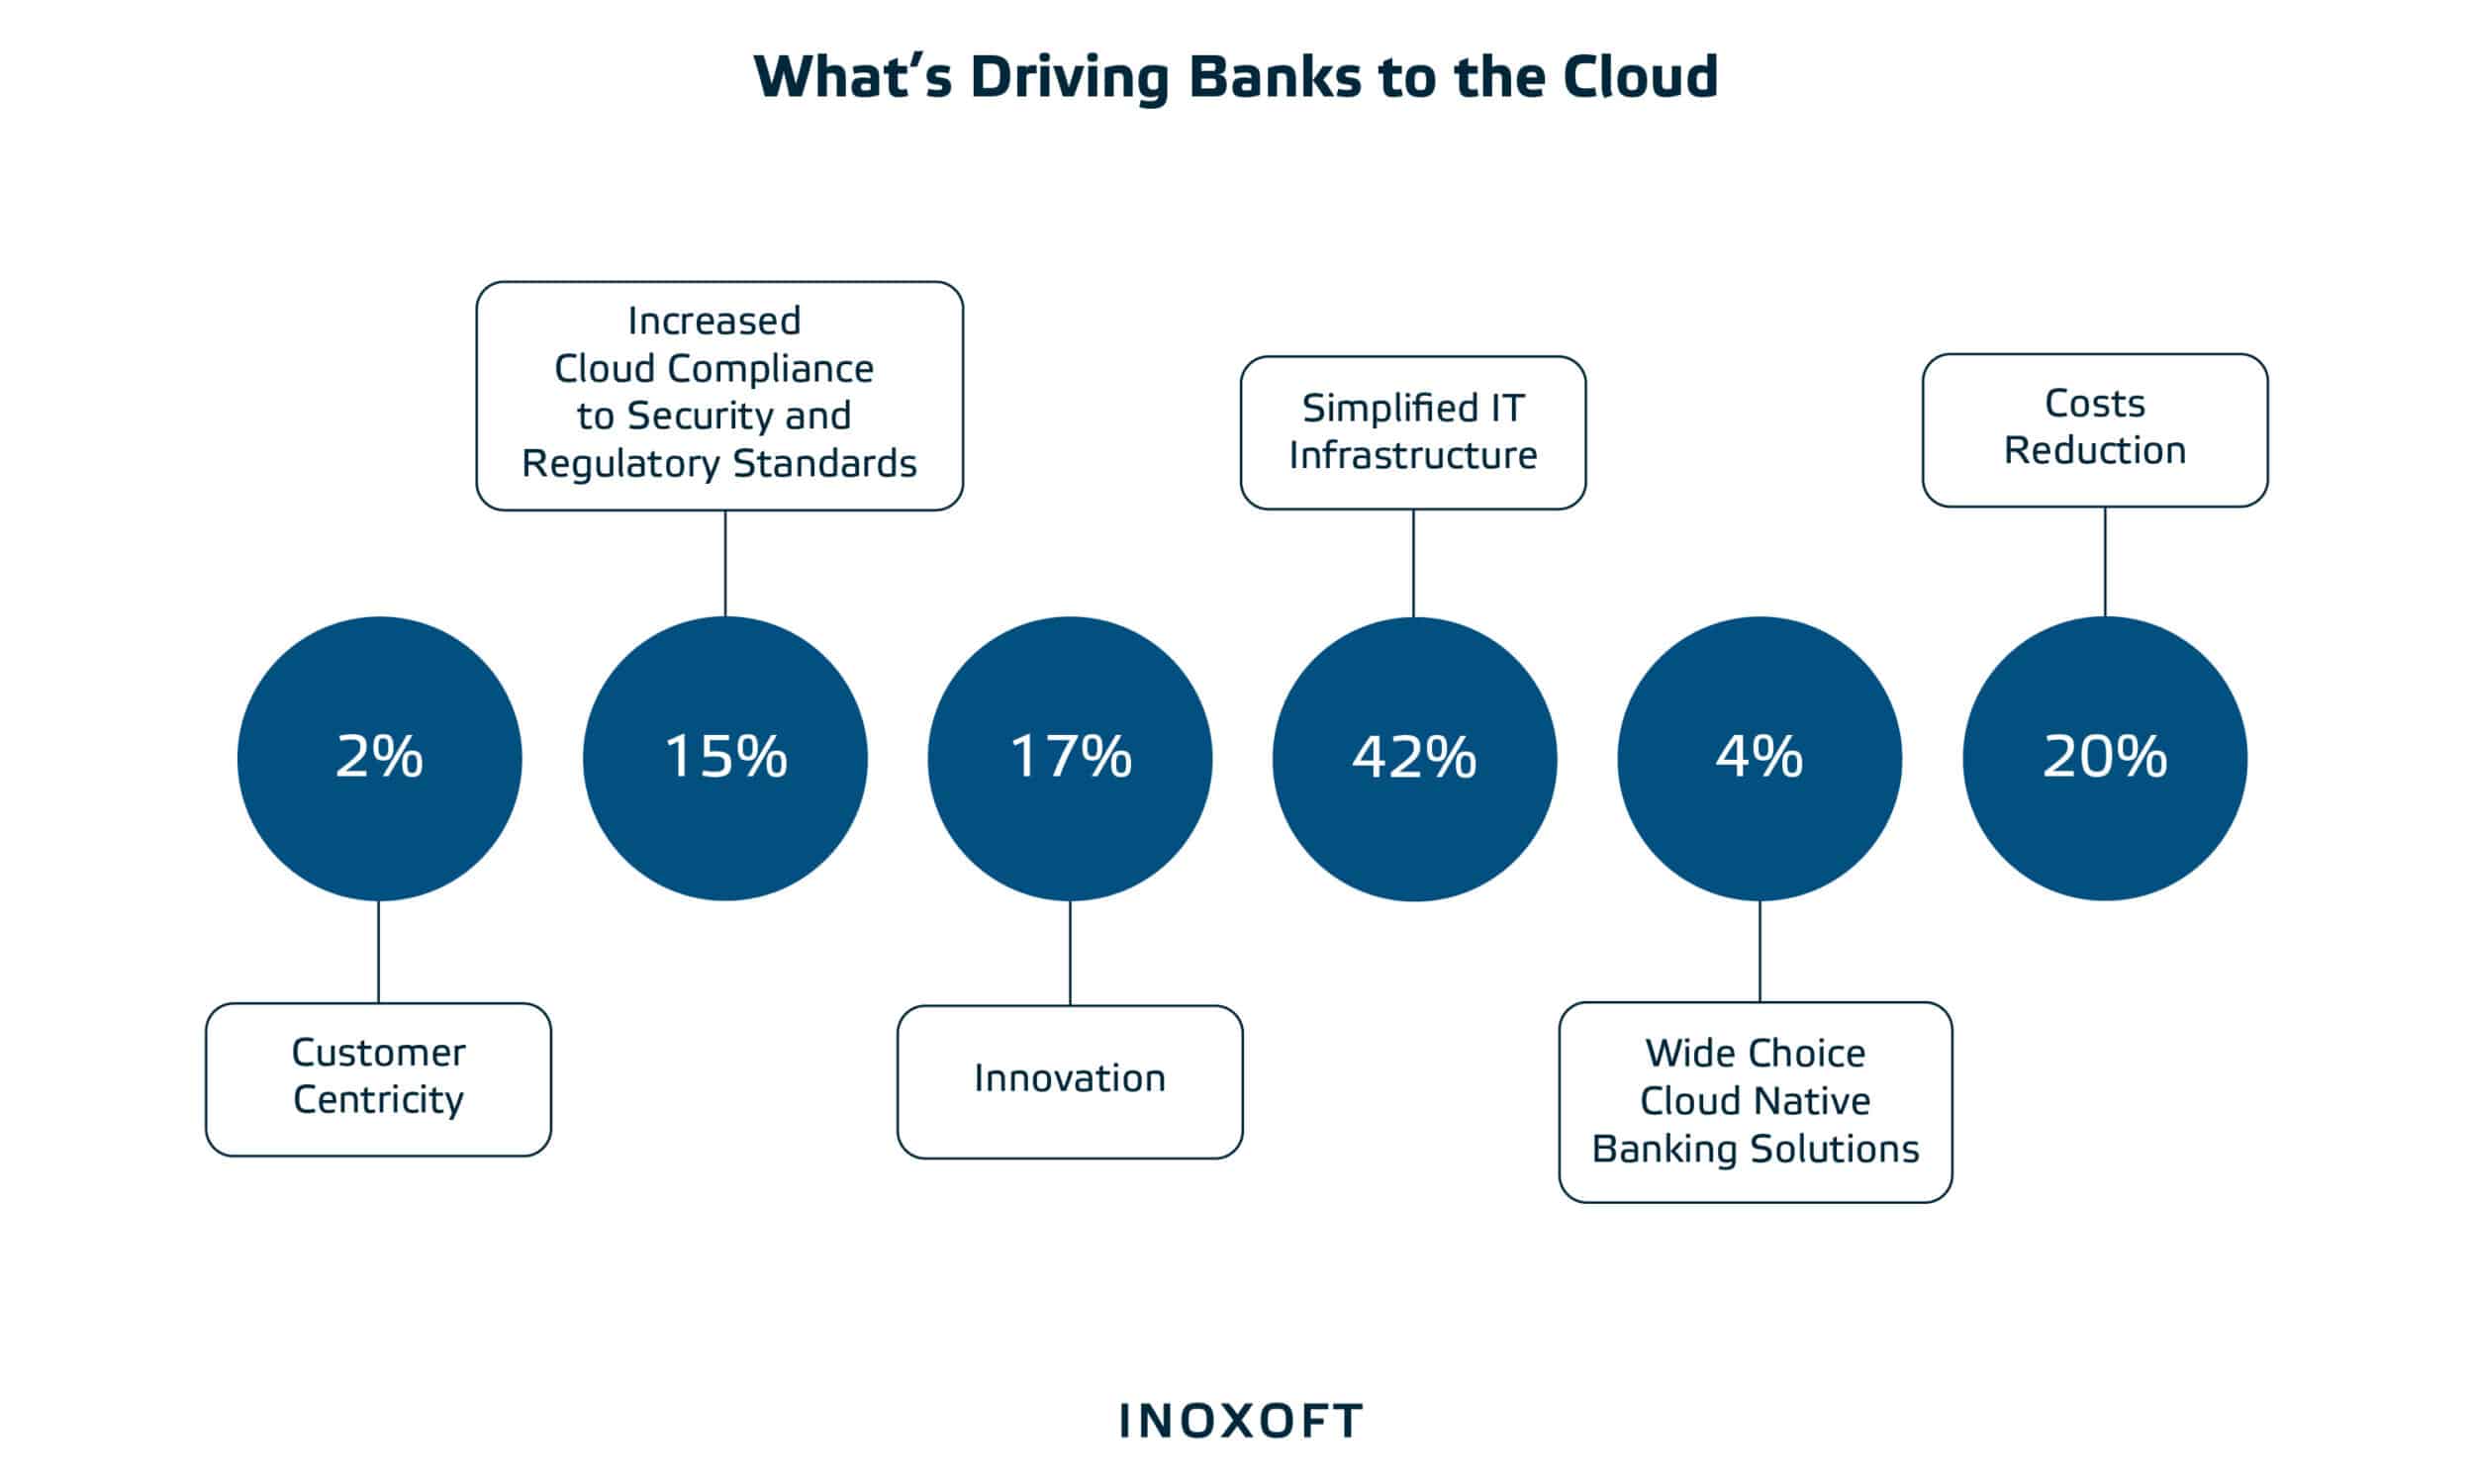 Key drivers to implement cloud computing for banking services